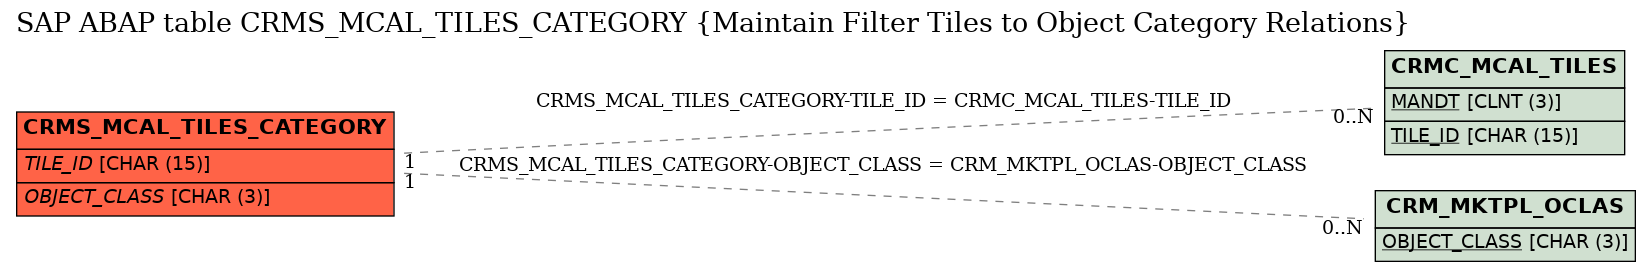 E-R Diagram for table CRMS_MCAL_TILES_CATEGORY (Maintain Filter Tiles to Object Category Relations)